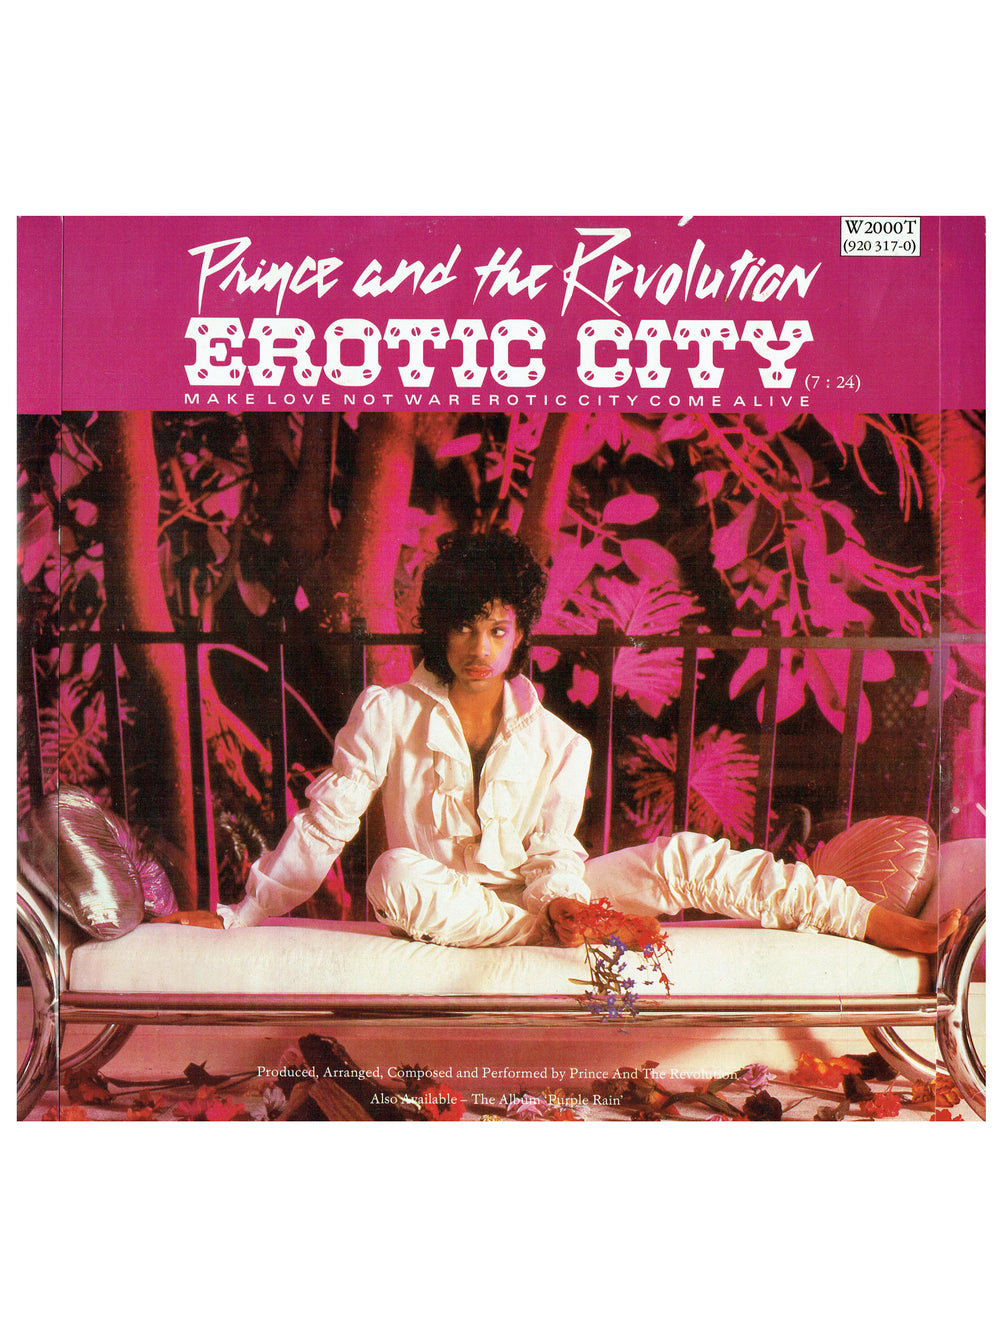 Prince Let's Go Crazy Take Me With U Erotic City UK 12 Inch Vinyl W200T HYPE